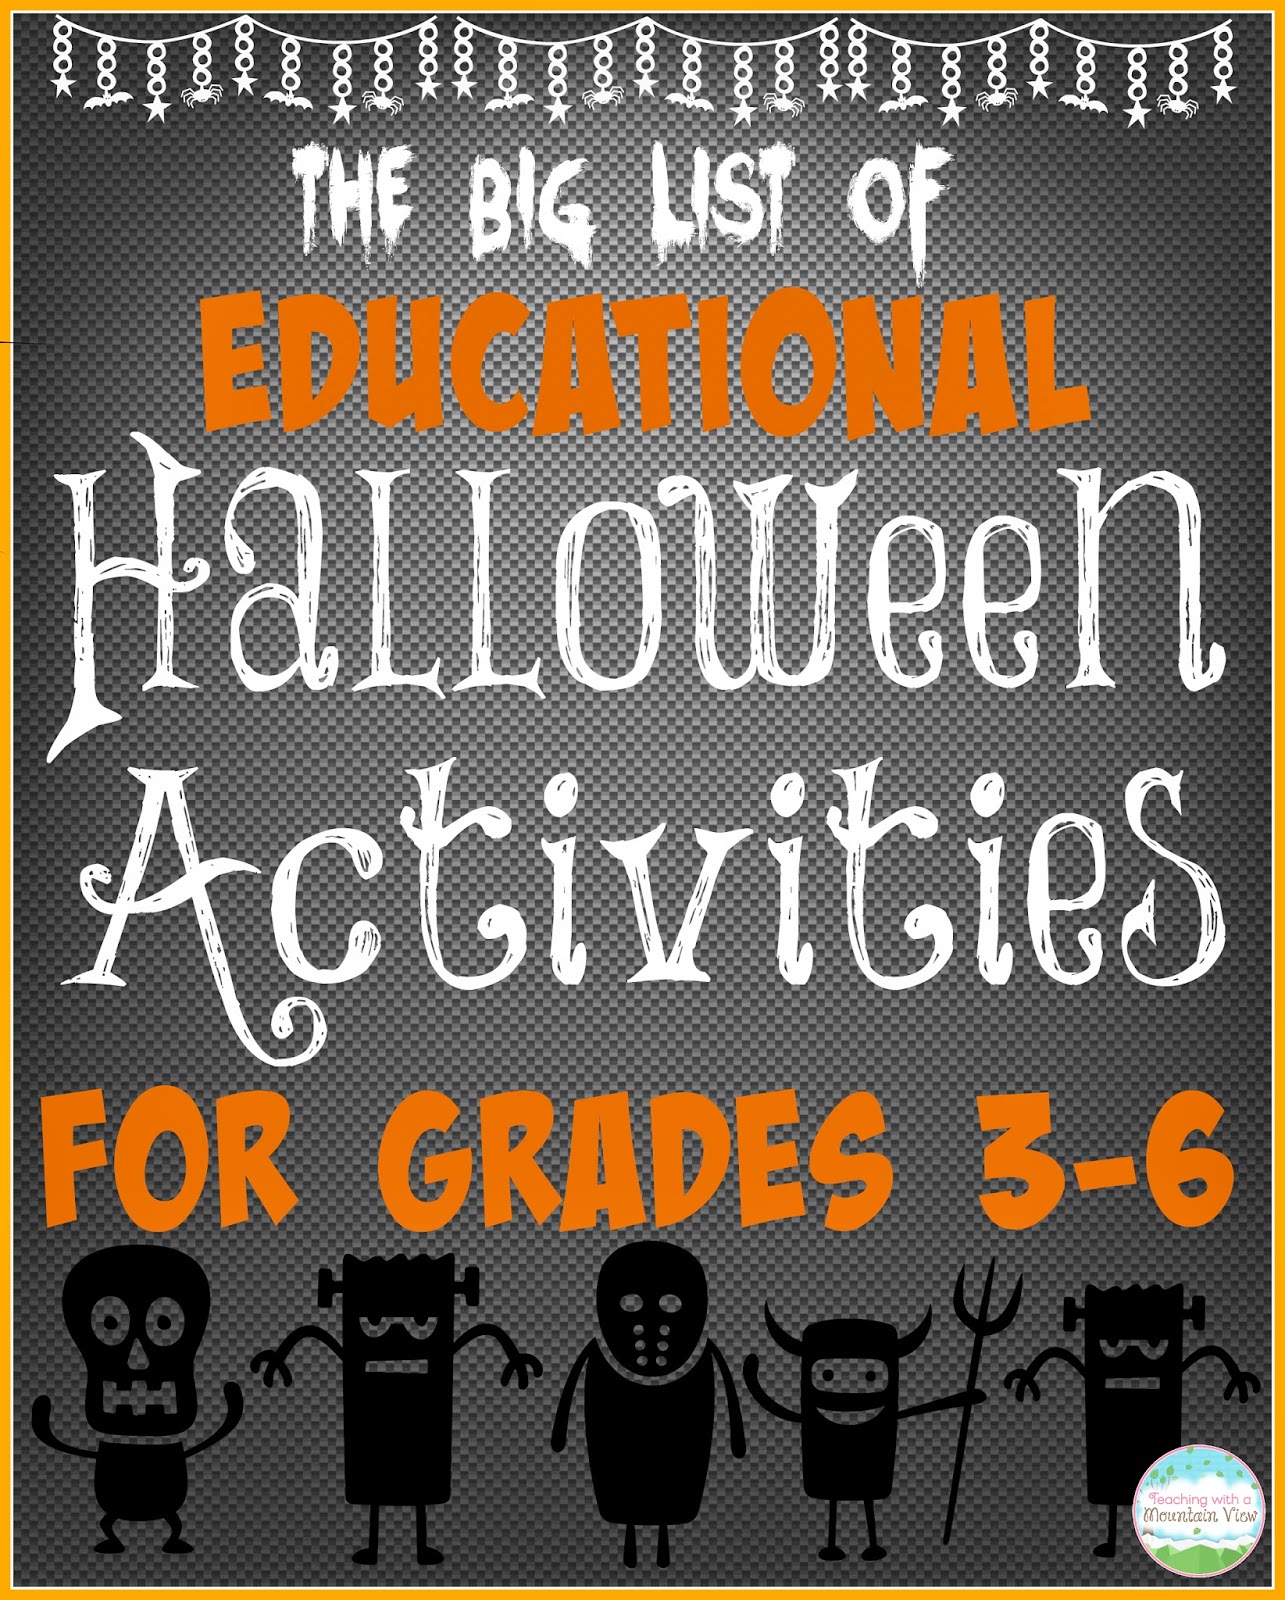 teaching-with-a-mountain-view-educational-halloween-activities-for-the-big-kids